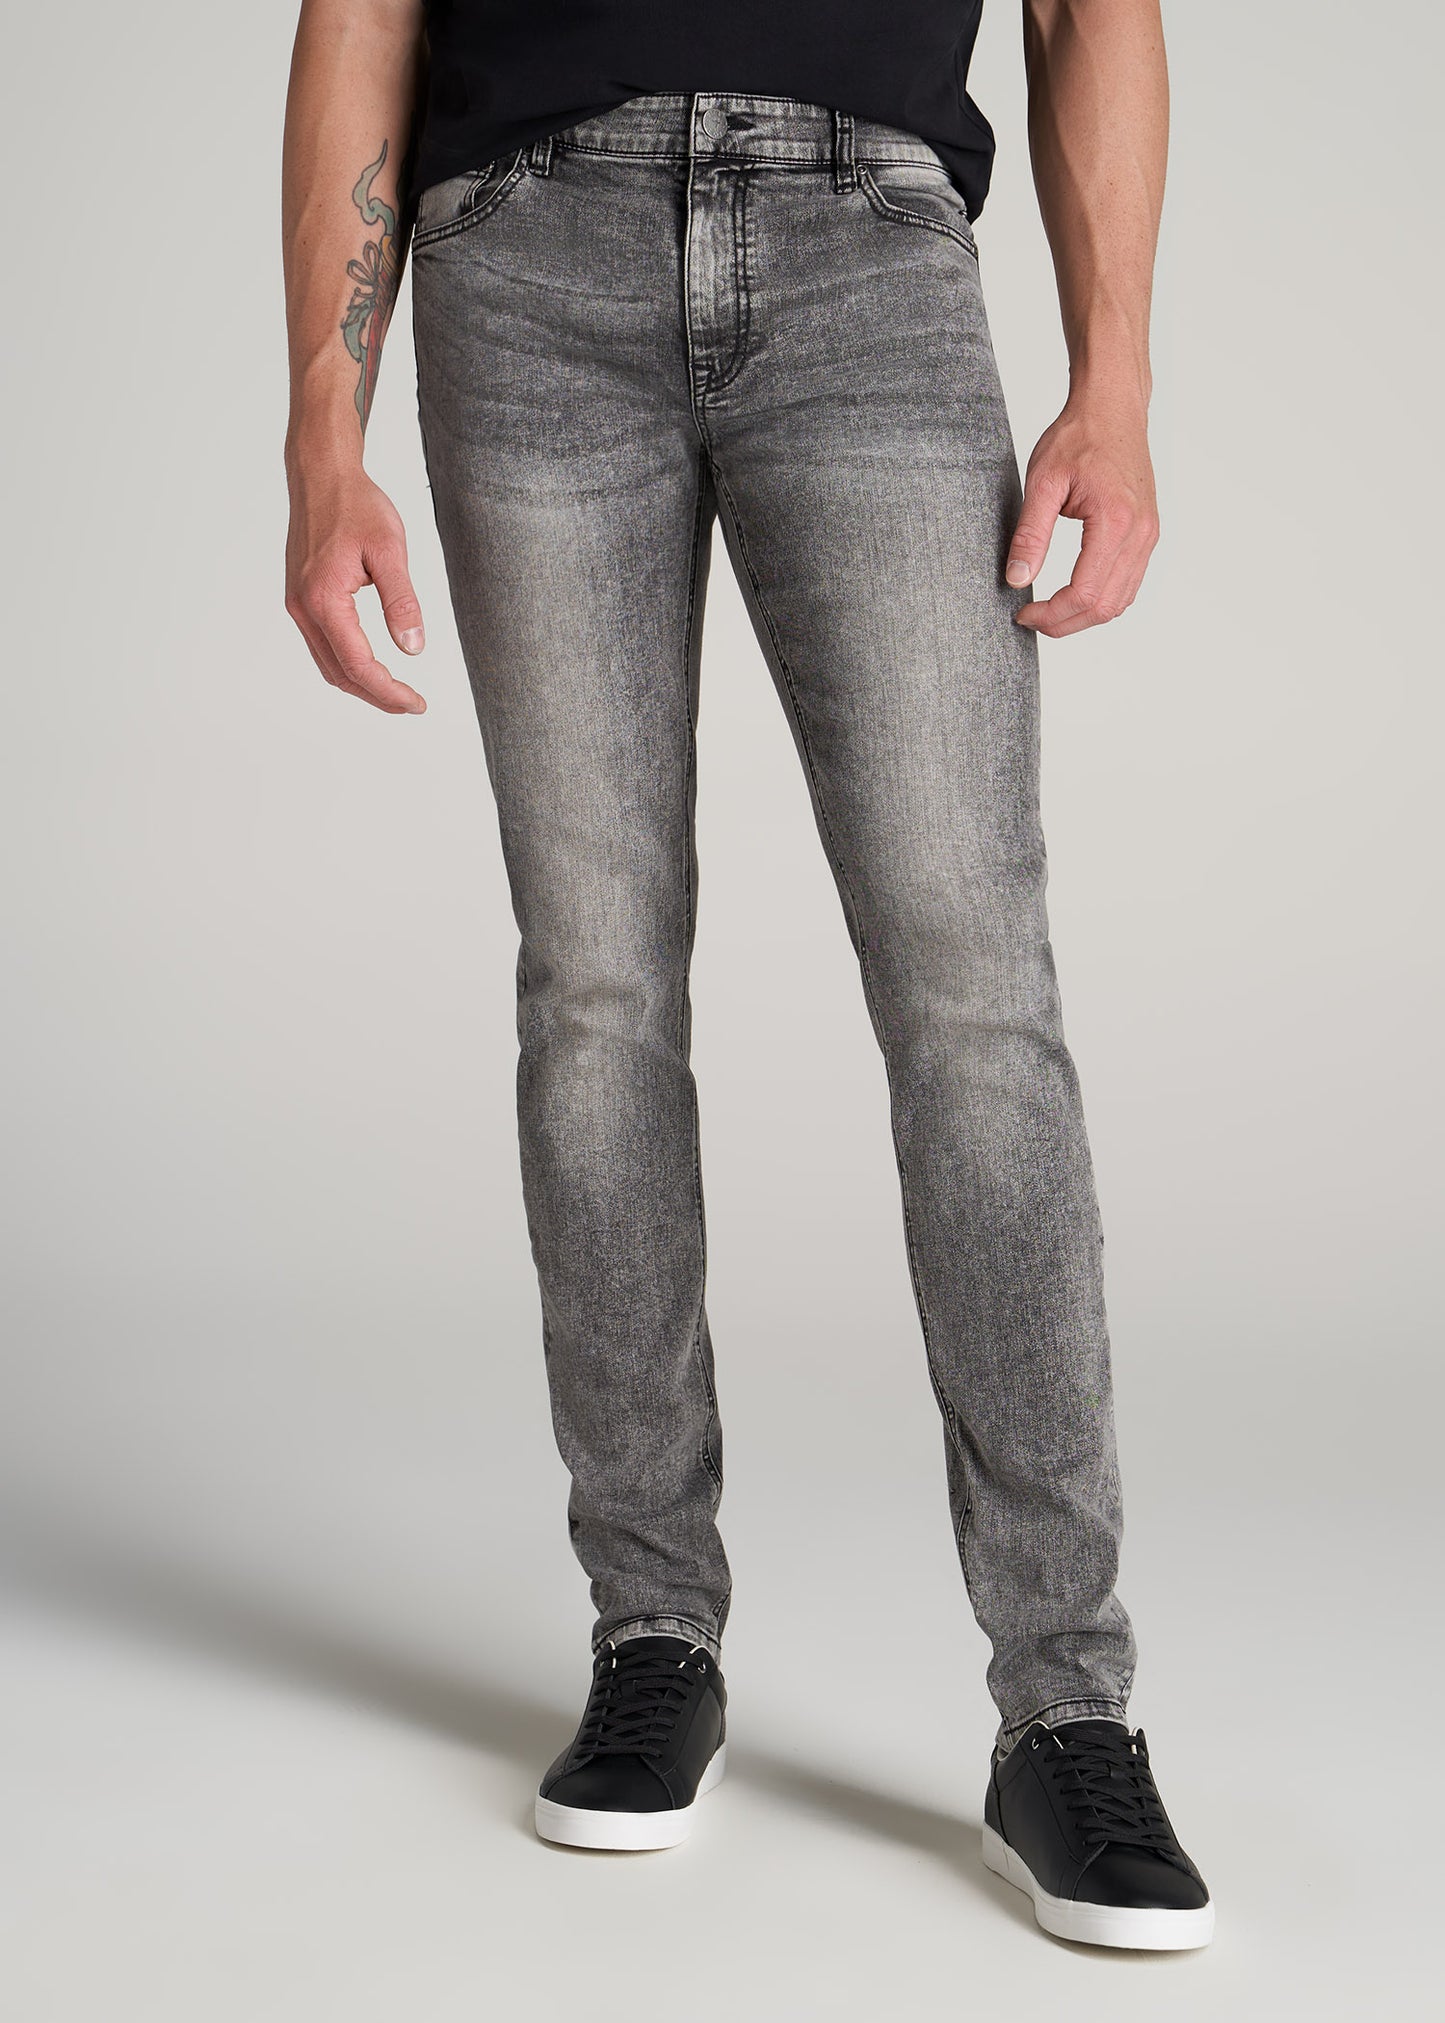 Travis SKINNY Jeans for Tall Men in Washed Faded Black